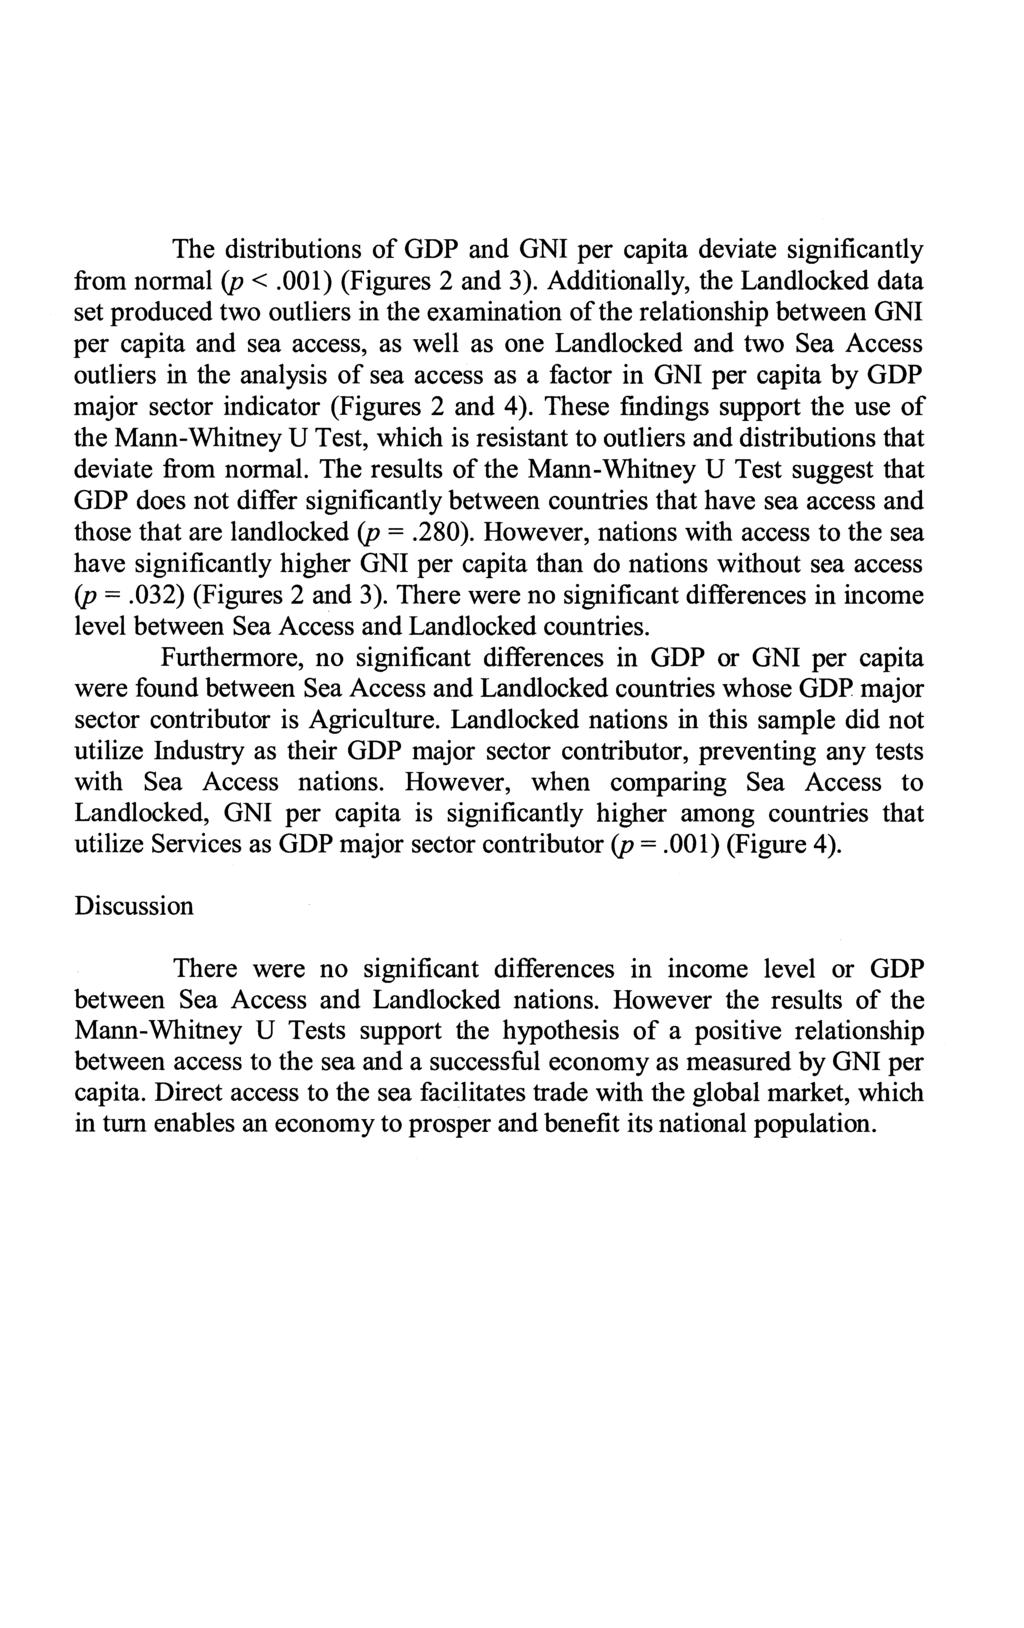 The distributions of GDP and GNI per capita deviate significantly from normal (p <.001) (Figures 2 and 3).